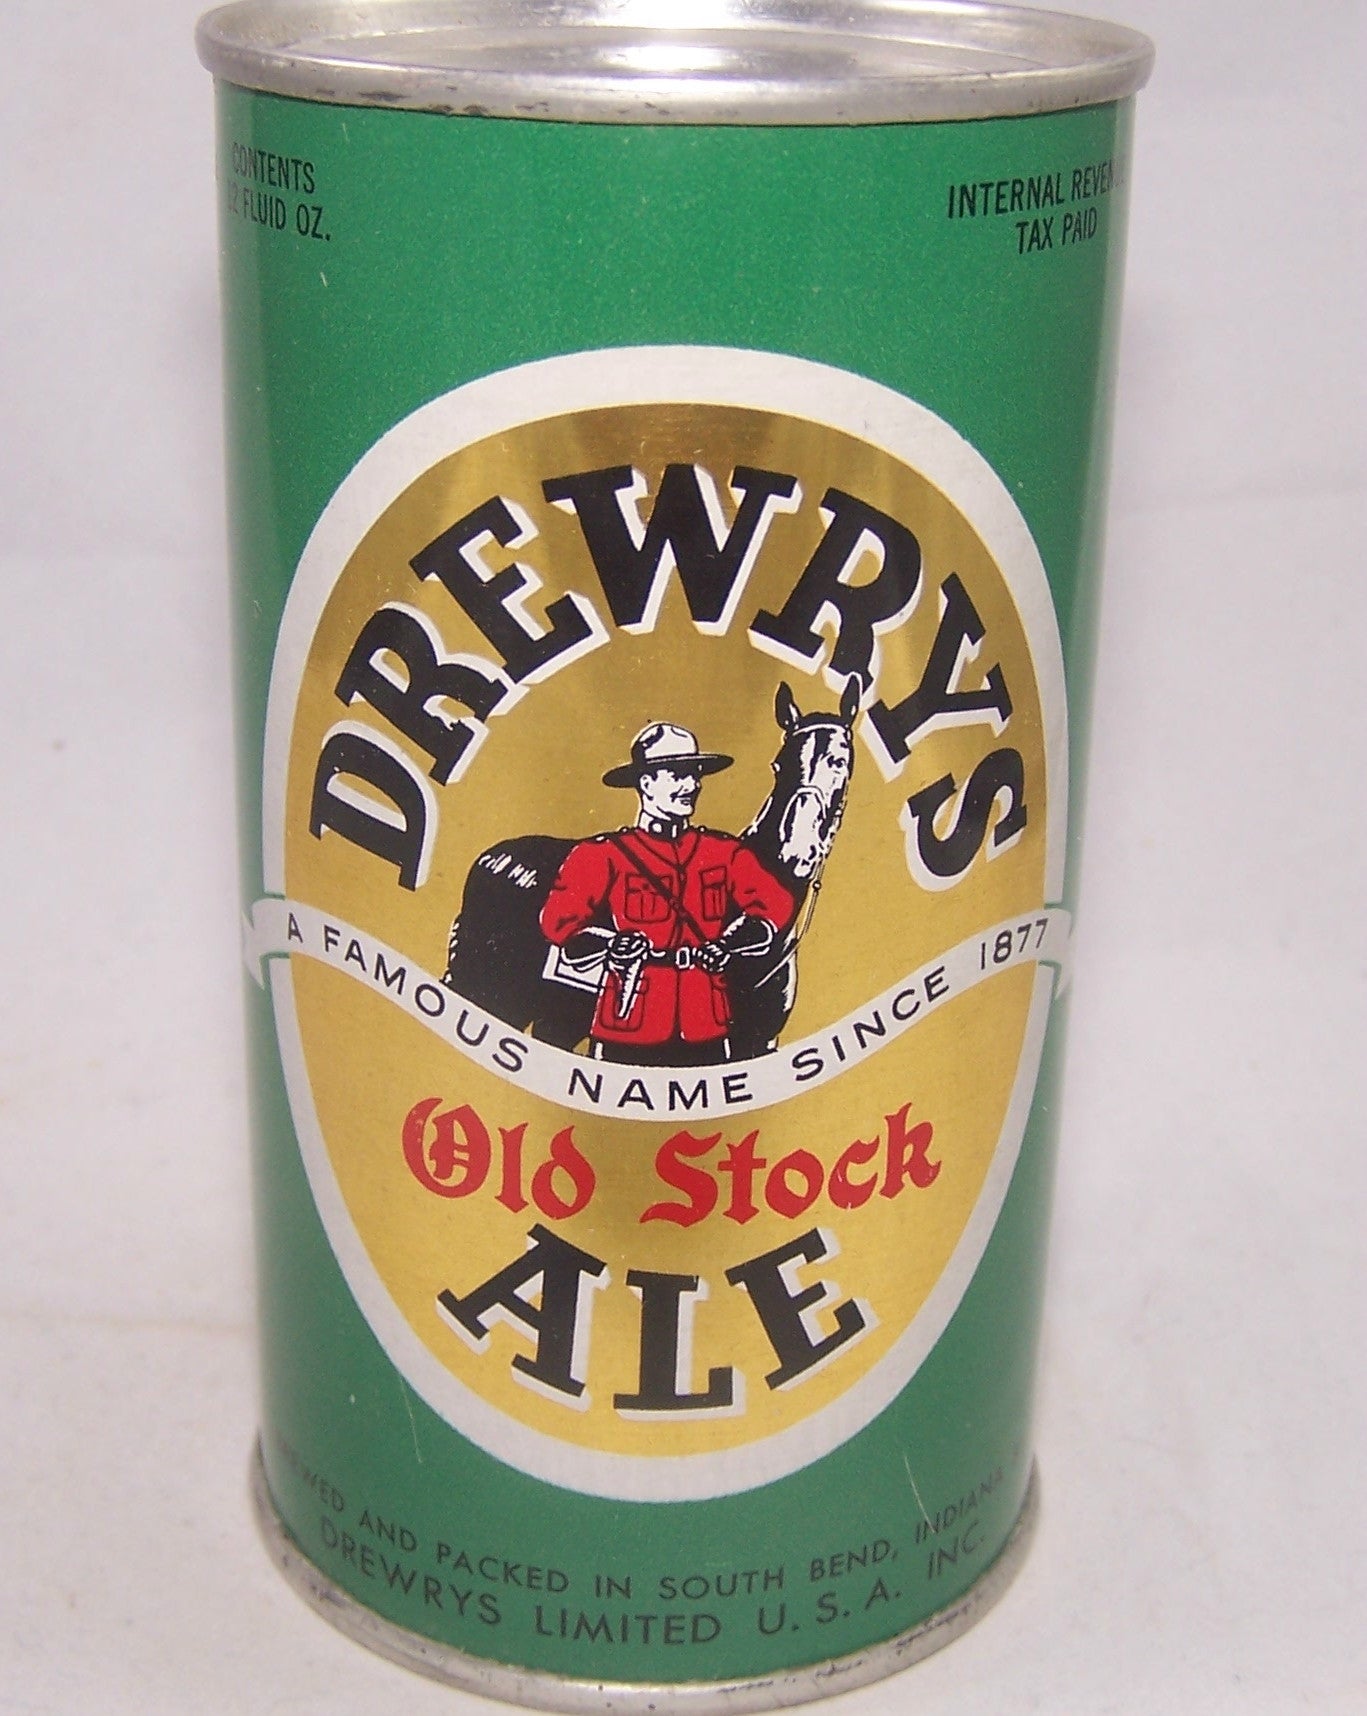 Drewrys Old Stock Ale IRTP, USBC 55-26, Grade A1+ Sold on 06/29/17